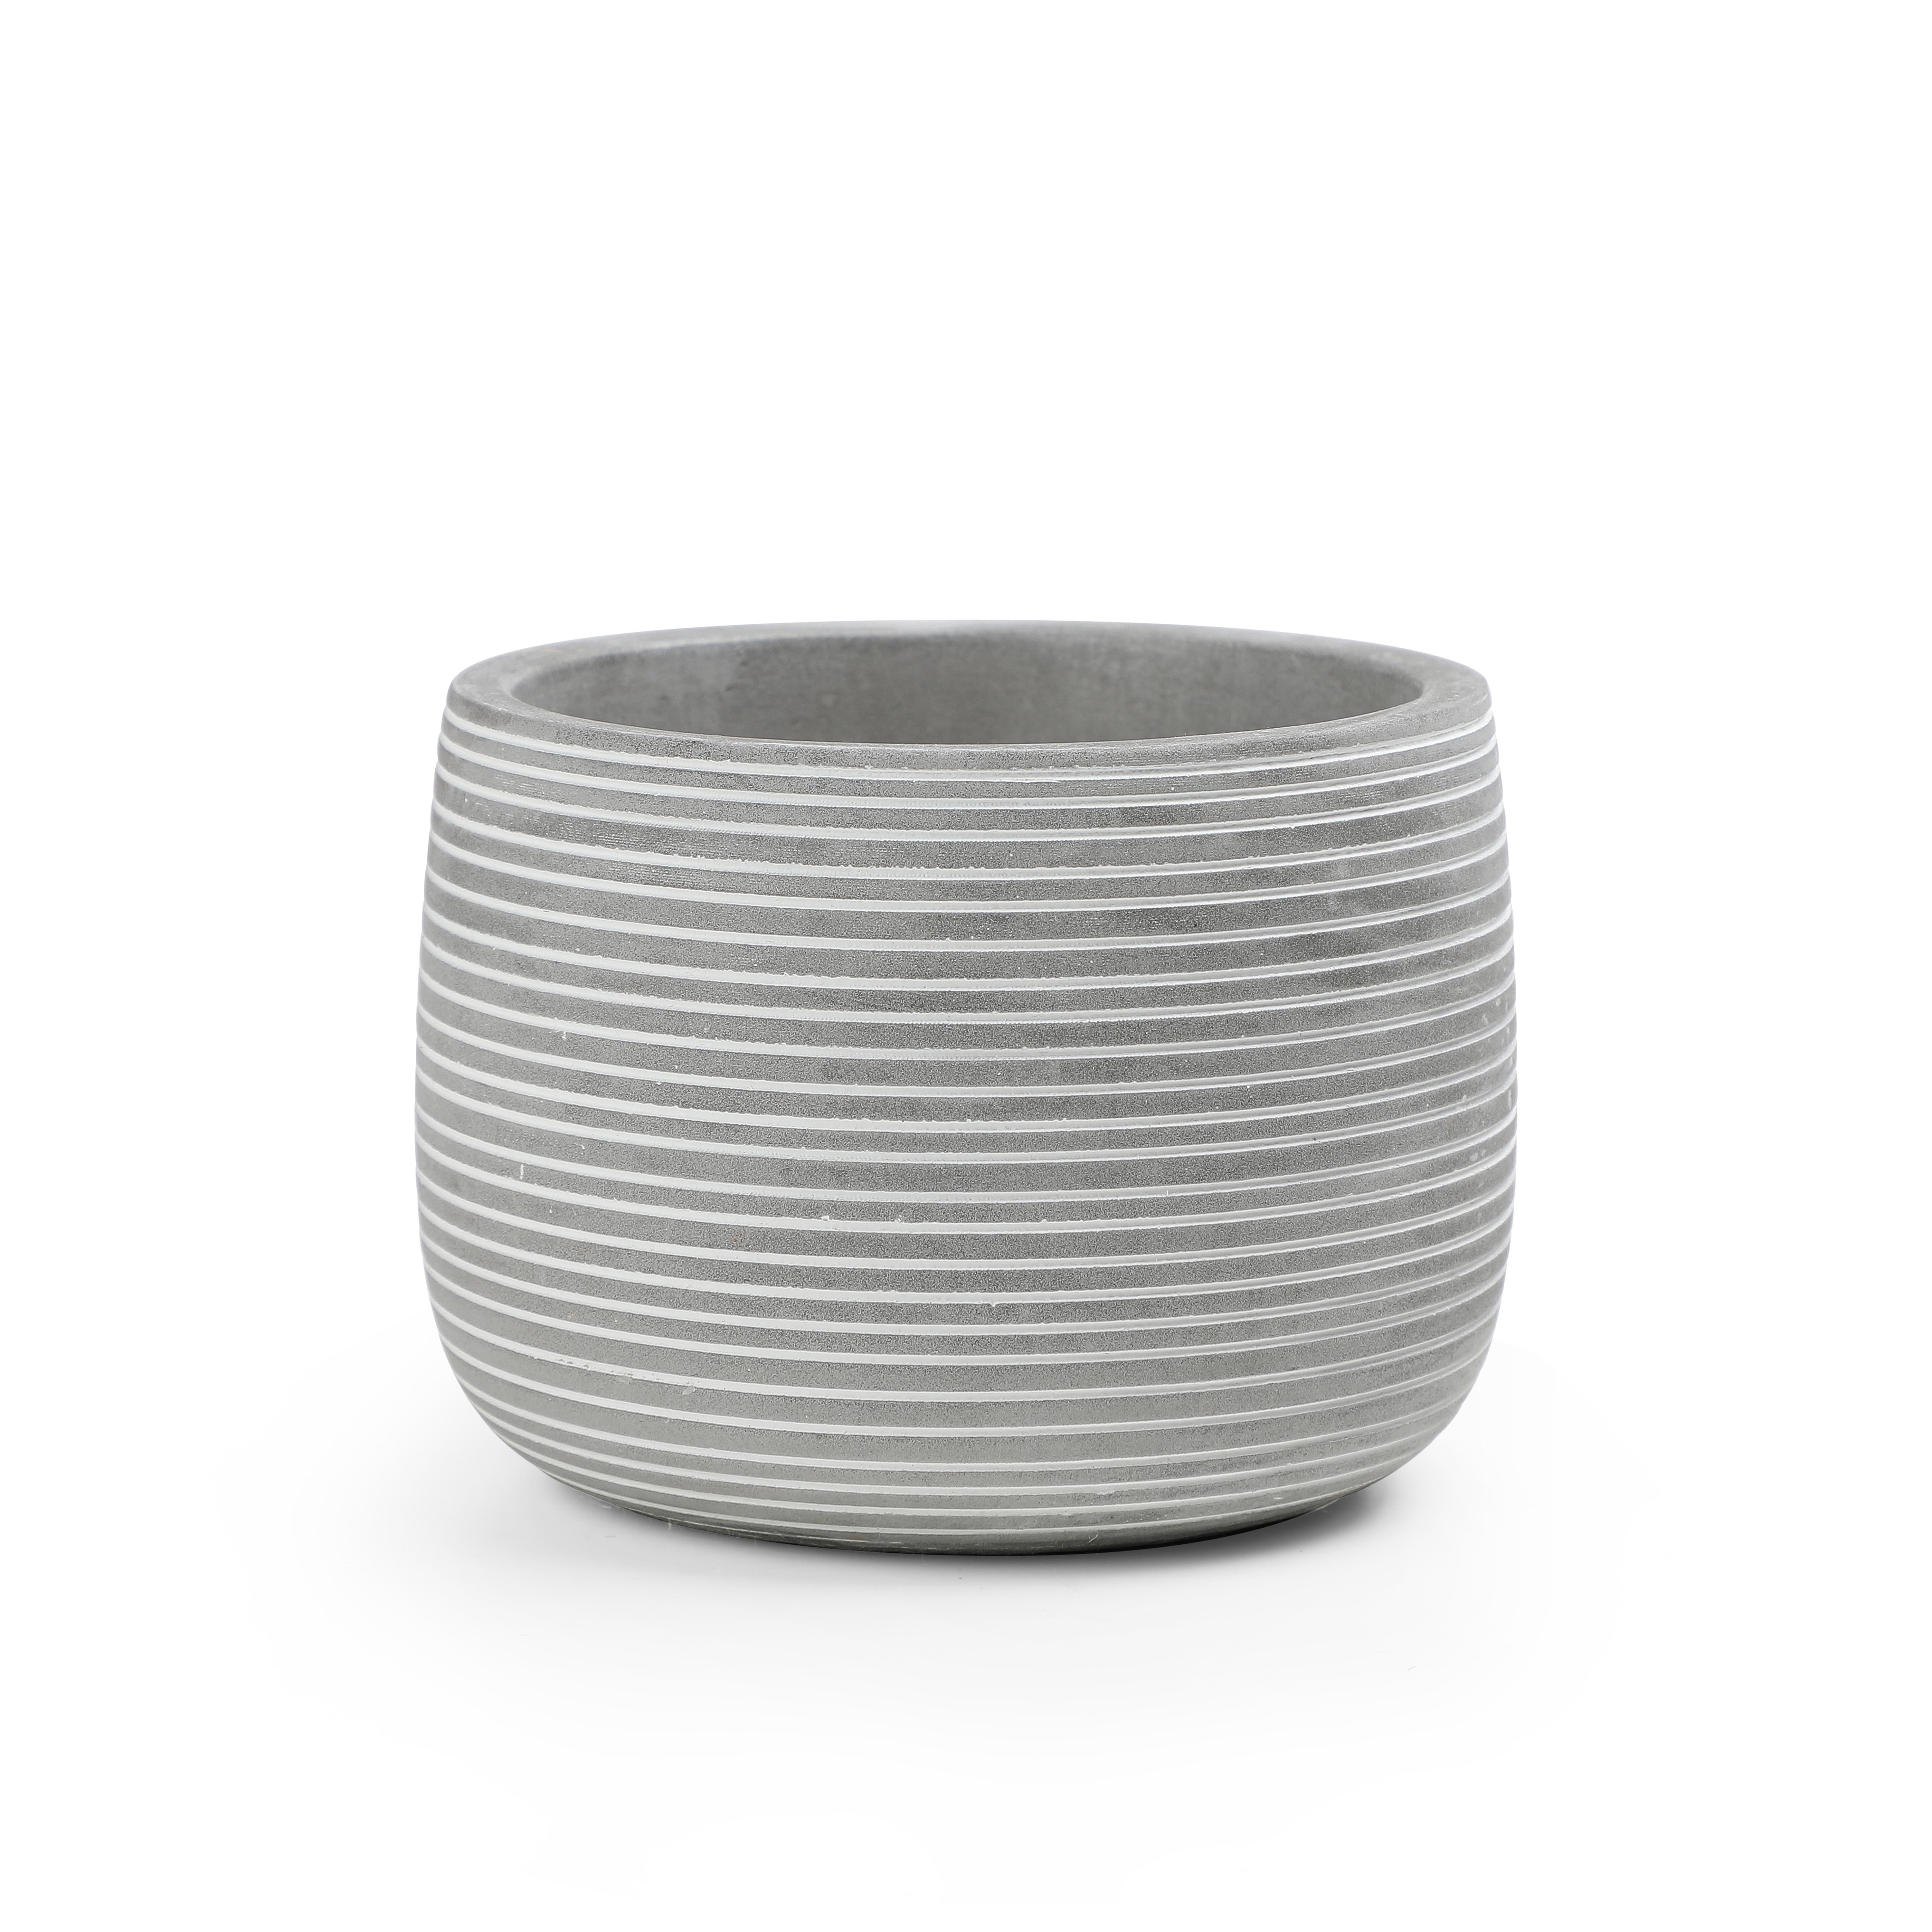 Mainstays Round Gray and White Striped Cement Decorative Pot, 5.7"L x 5.7"W x 4.1"H